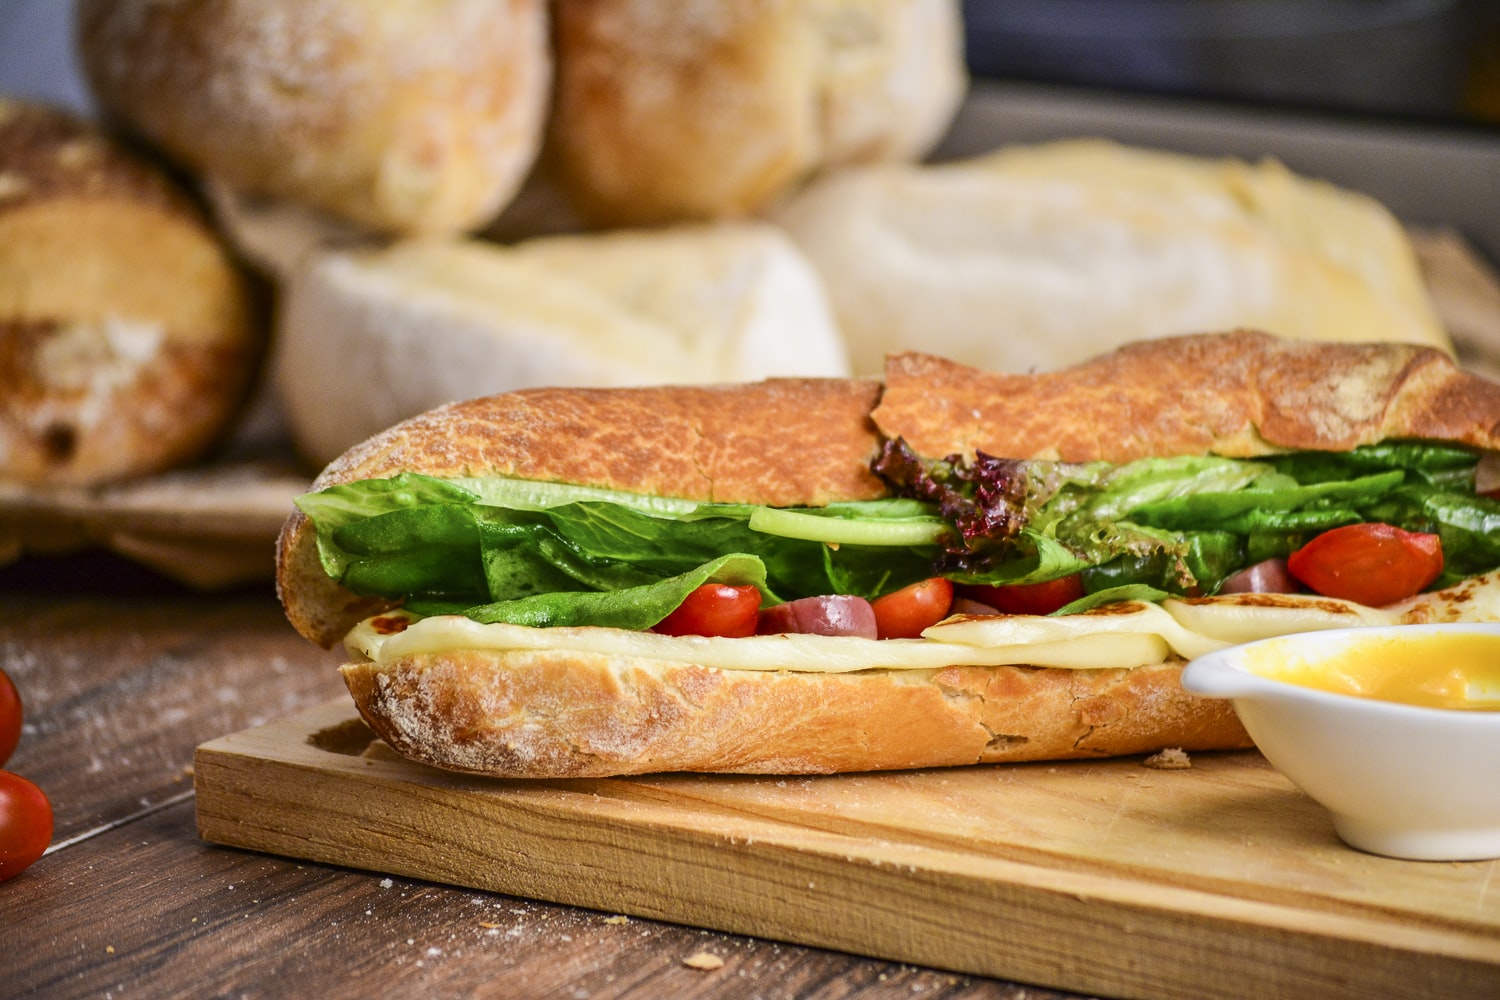 How transactions are added to the blockchain is similar to how sandwiches are prepared. Photo of a sandwich with vegetables and cheese